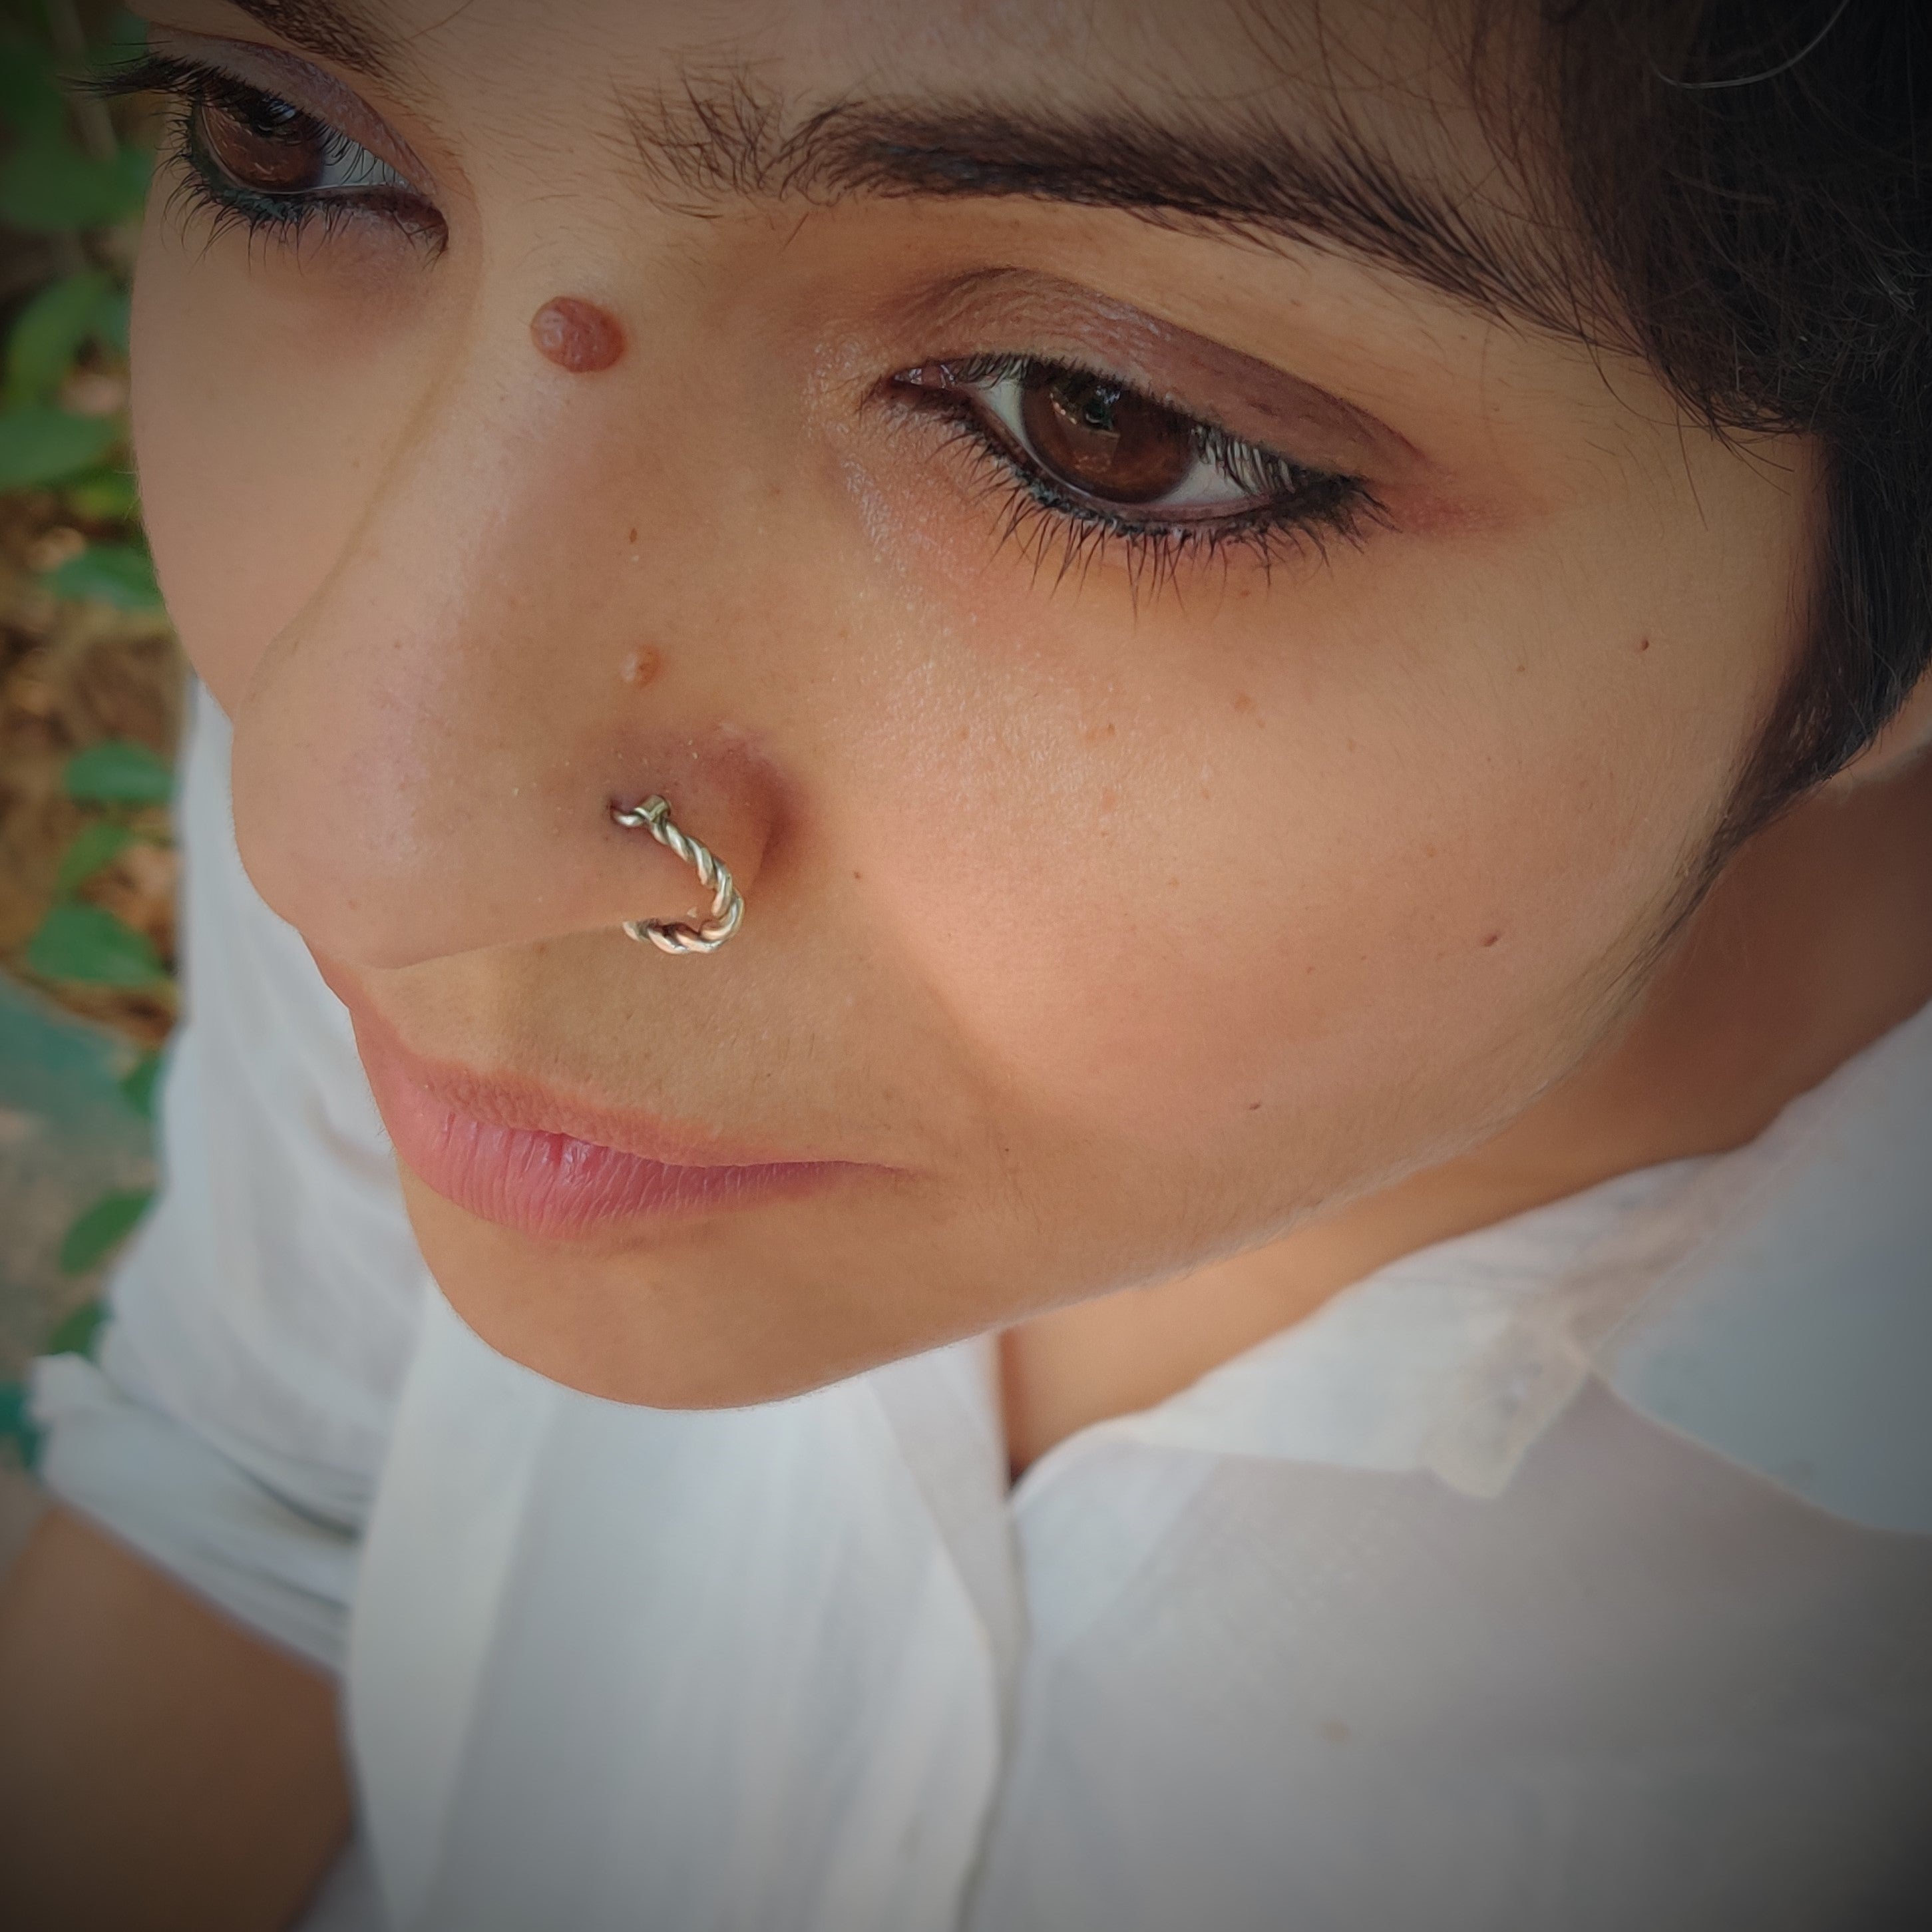 Buy Silver Nose Ring Online for Women by Ruby Raang Studio - 3988170